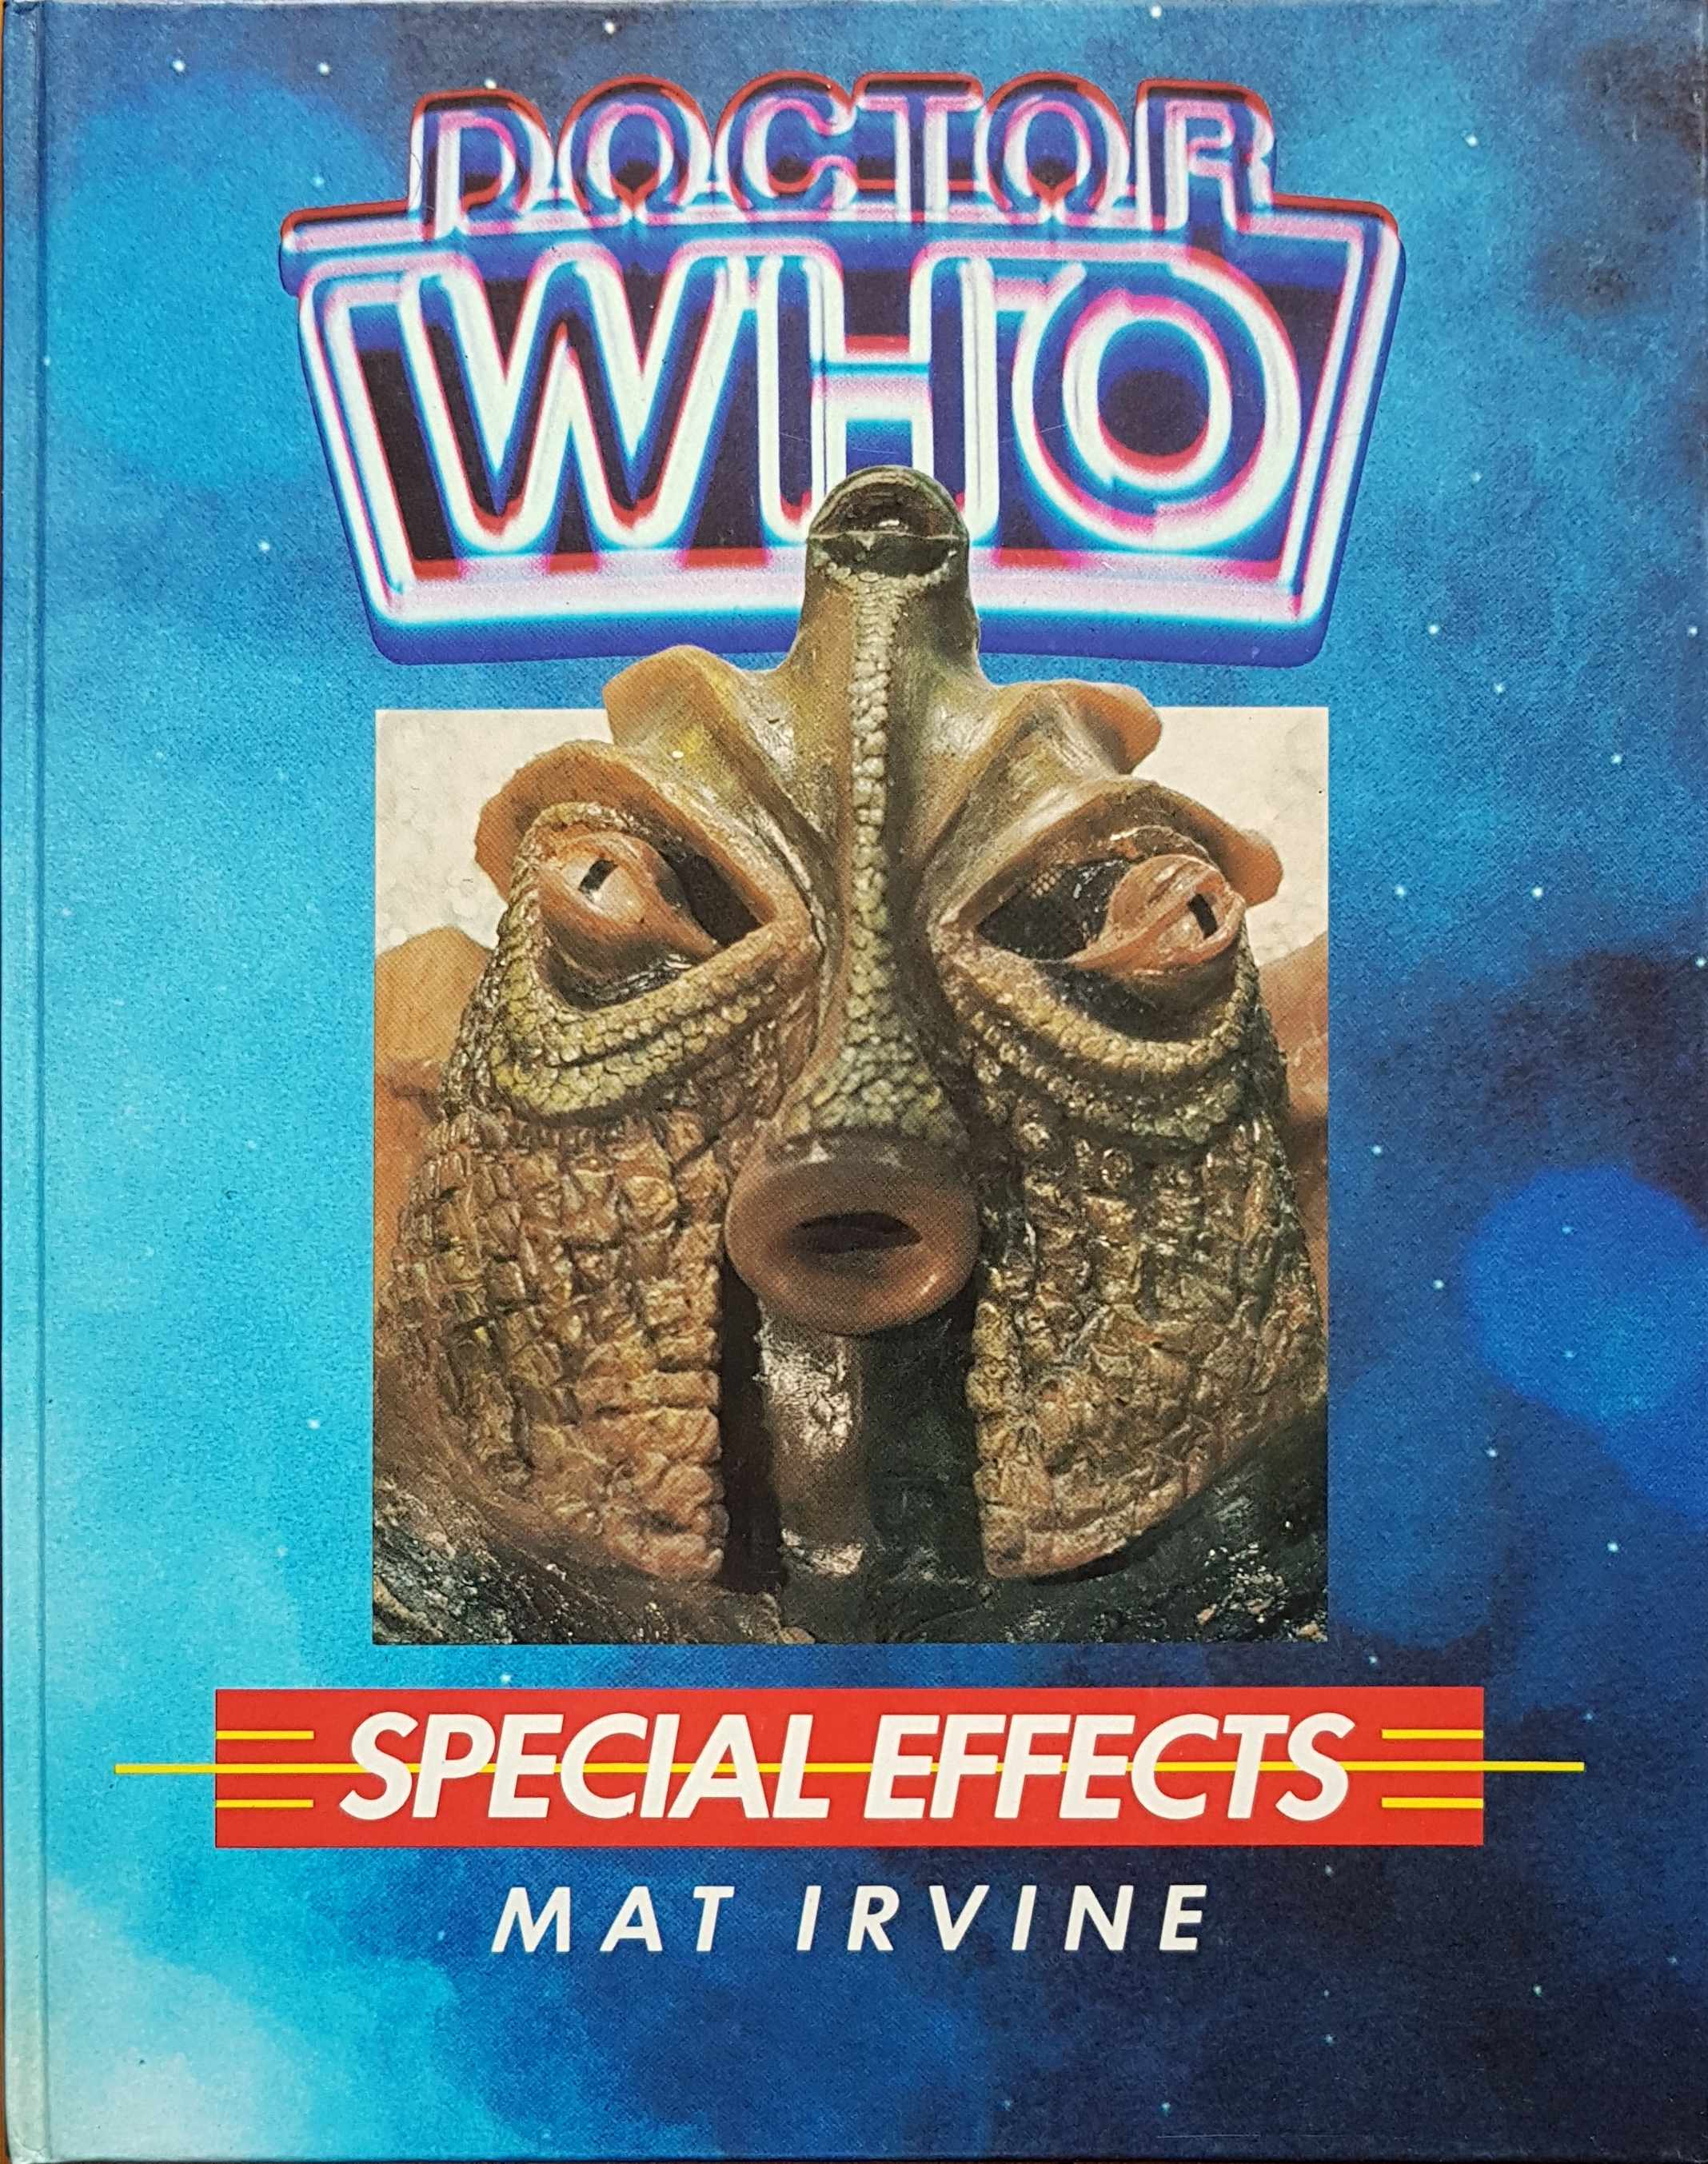 Picture of 0-09-167920-6 Doctor Who - Special effects by artist Mat Irvine from the BBC records and Tapes library